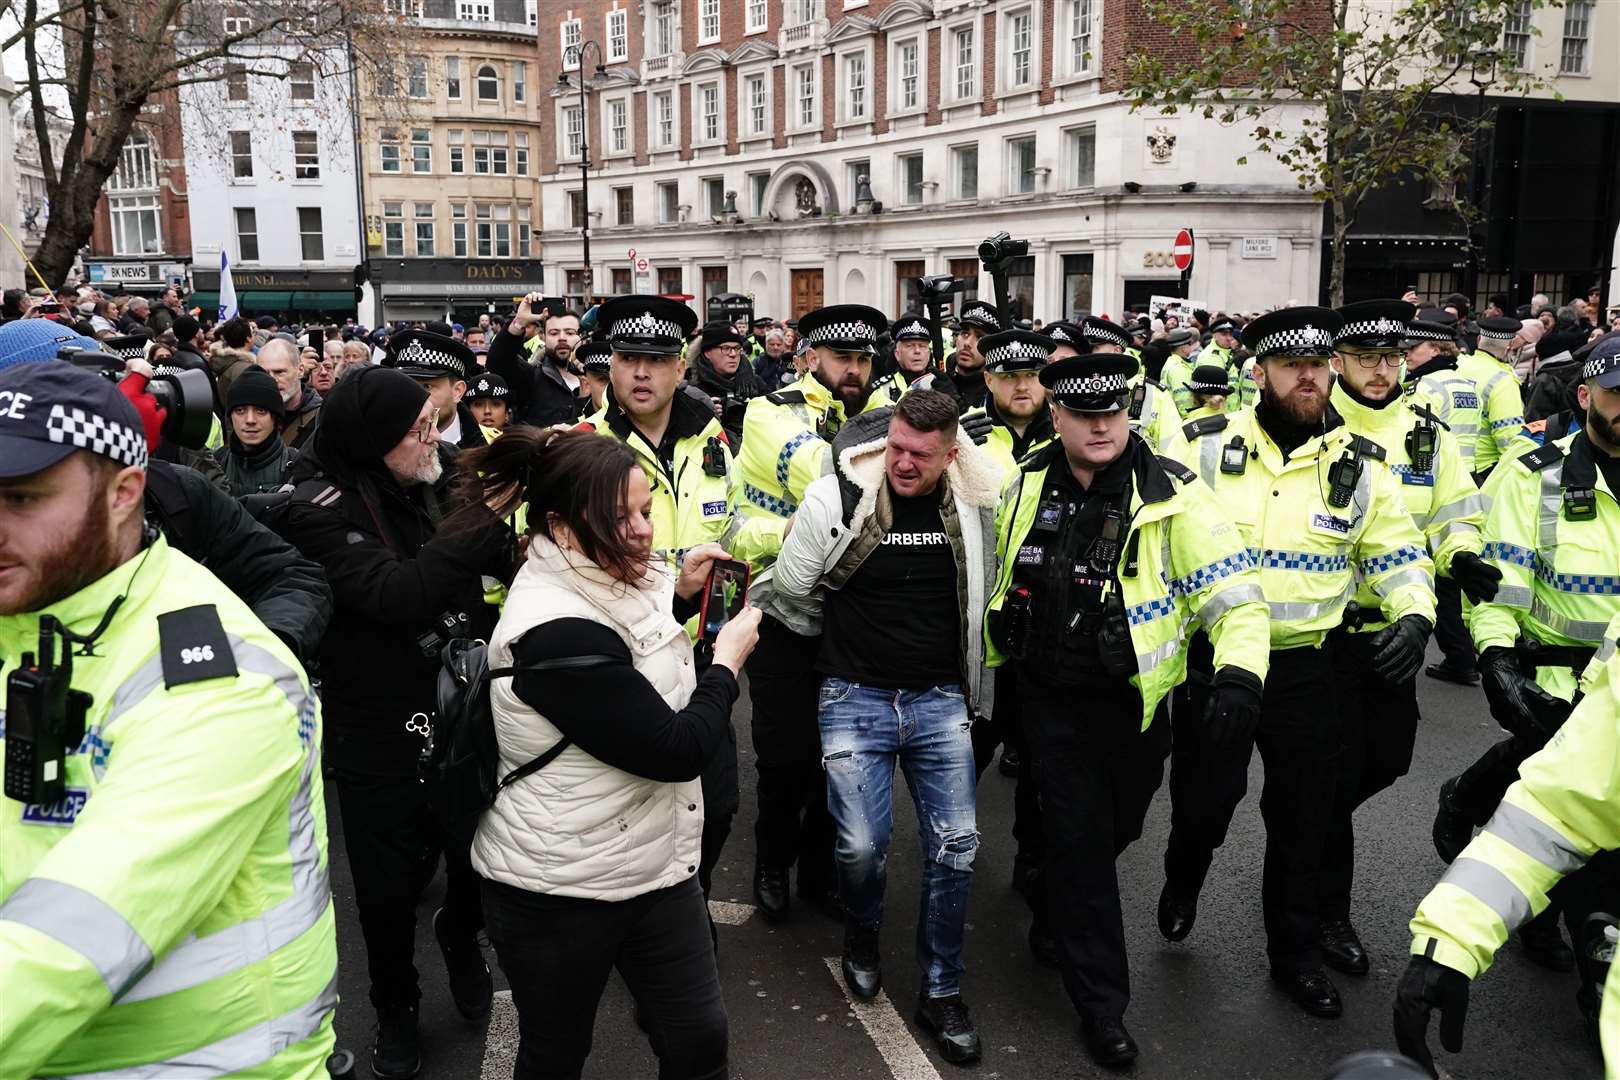 Tommy Robinson is led away by police officers as people take part in a march against antisemitism (Jordan Pettitt/PA)